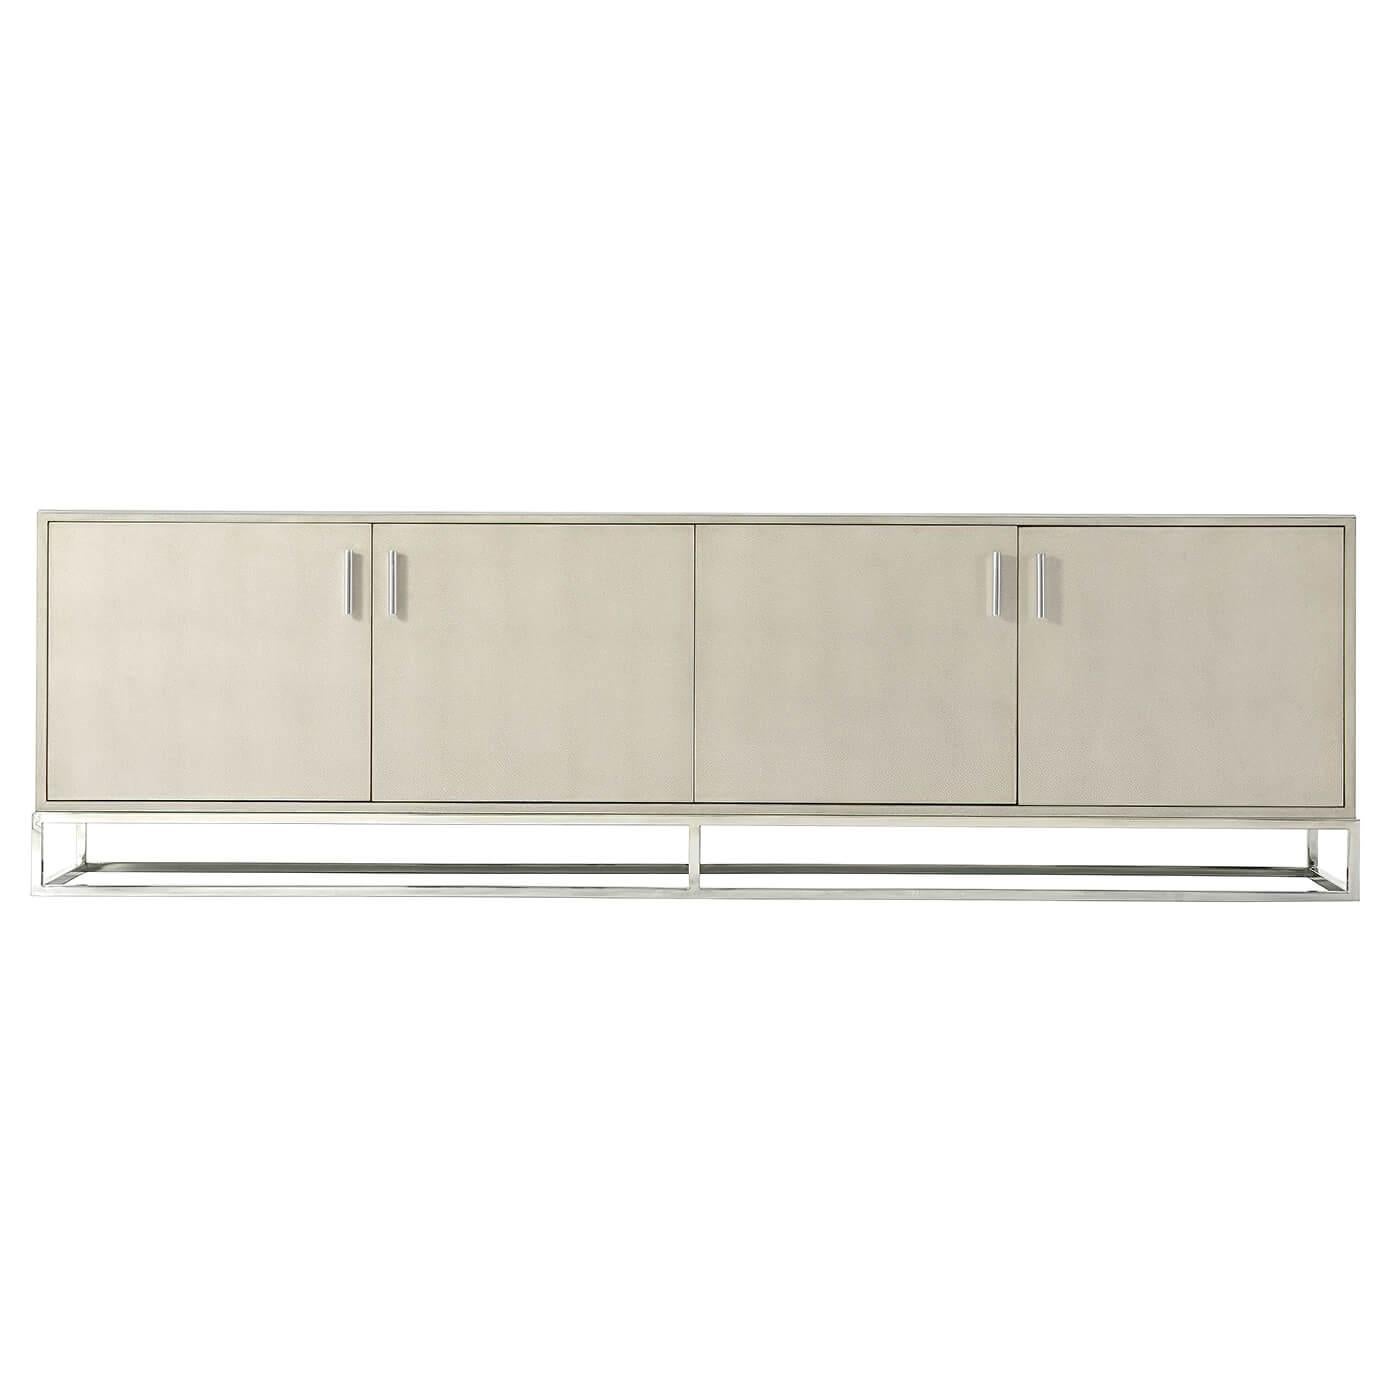 Modern shagreen embossed leather wrapped media cabinet, in our lighter overcast finish, with four cabinet doors enclosing shelves and with brushed nickel finish open cube base, molding, and handles.

Dimensions: 94.5